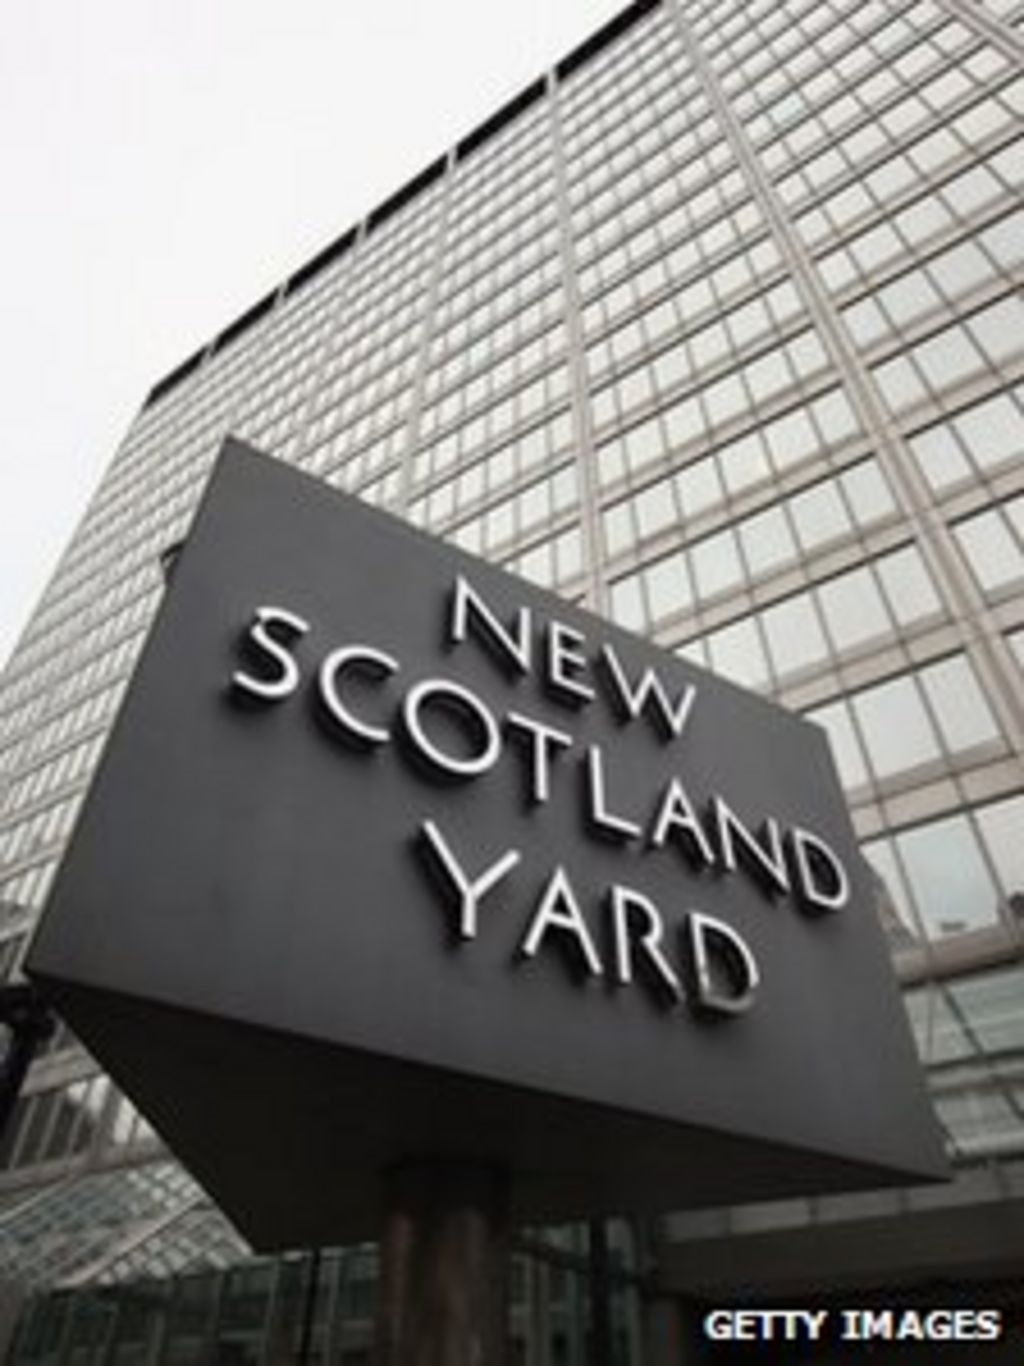 Scotland Yard could be sold as part of £500m savings plan ...